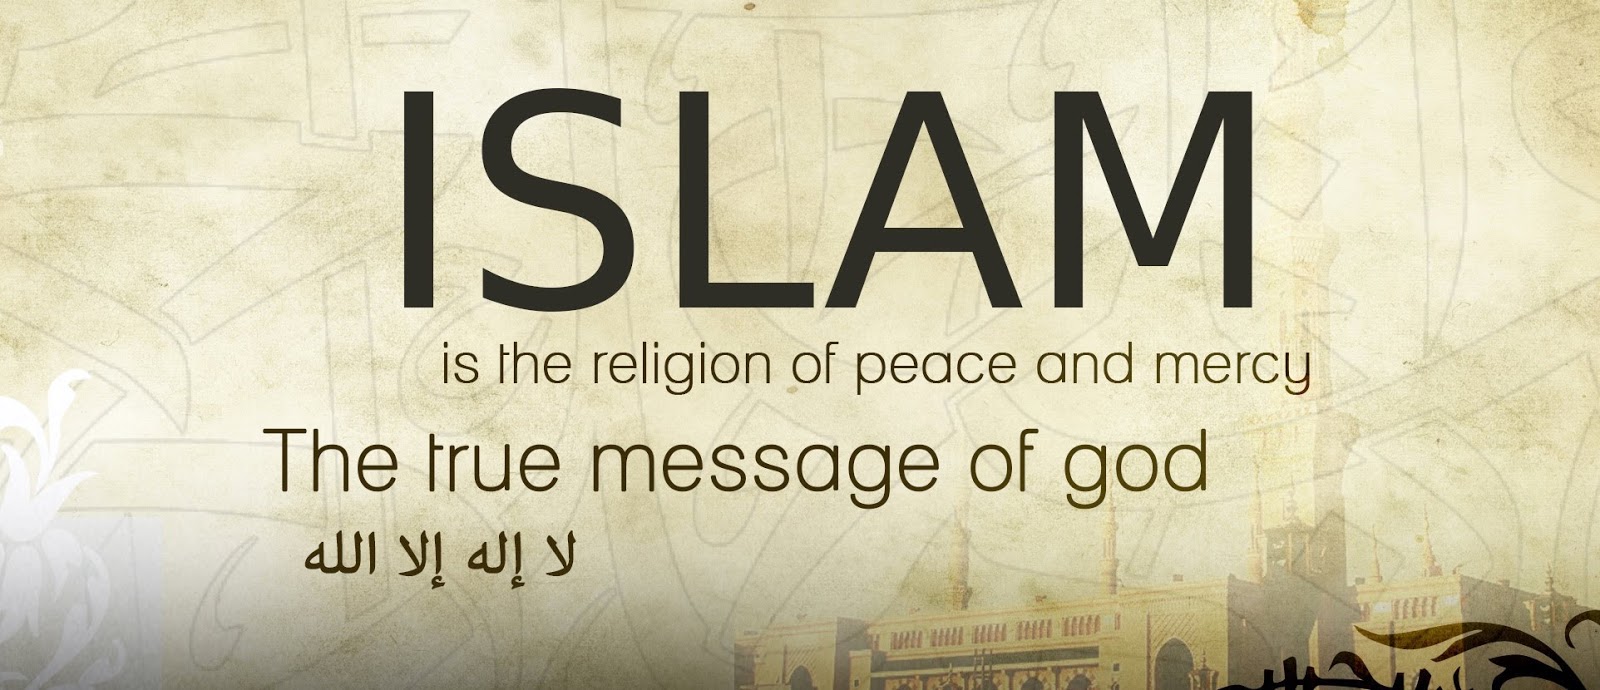 what are the 12 major religions of the world islam